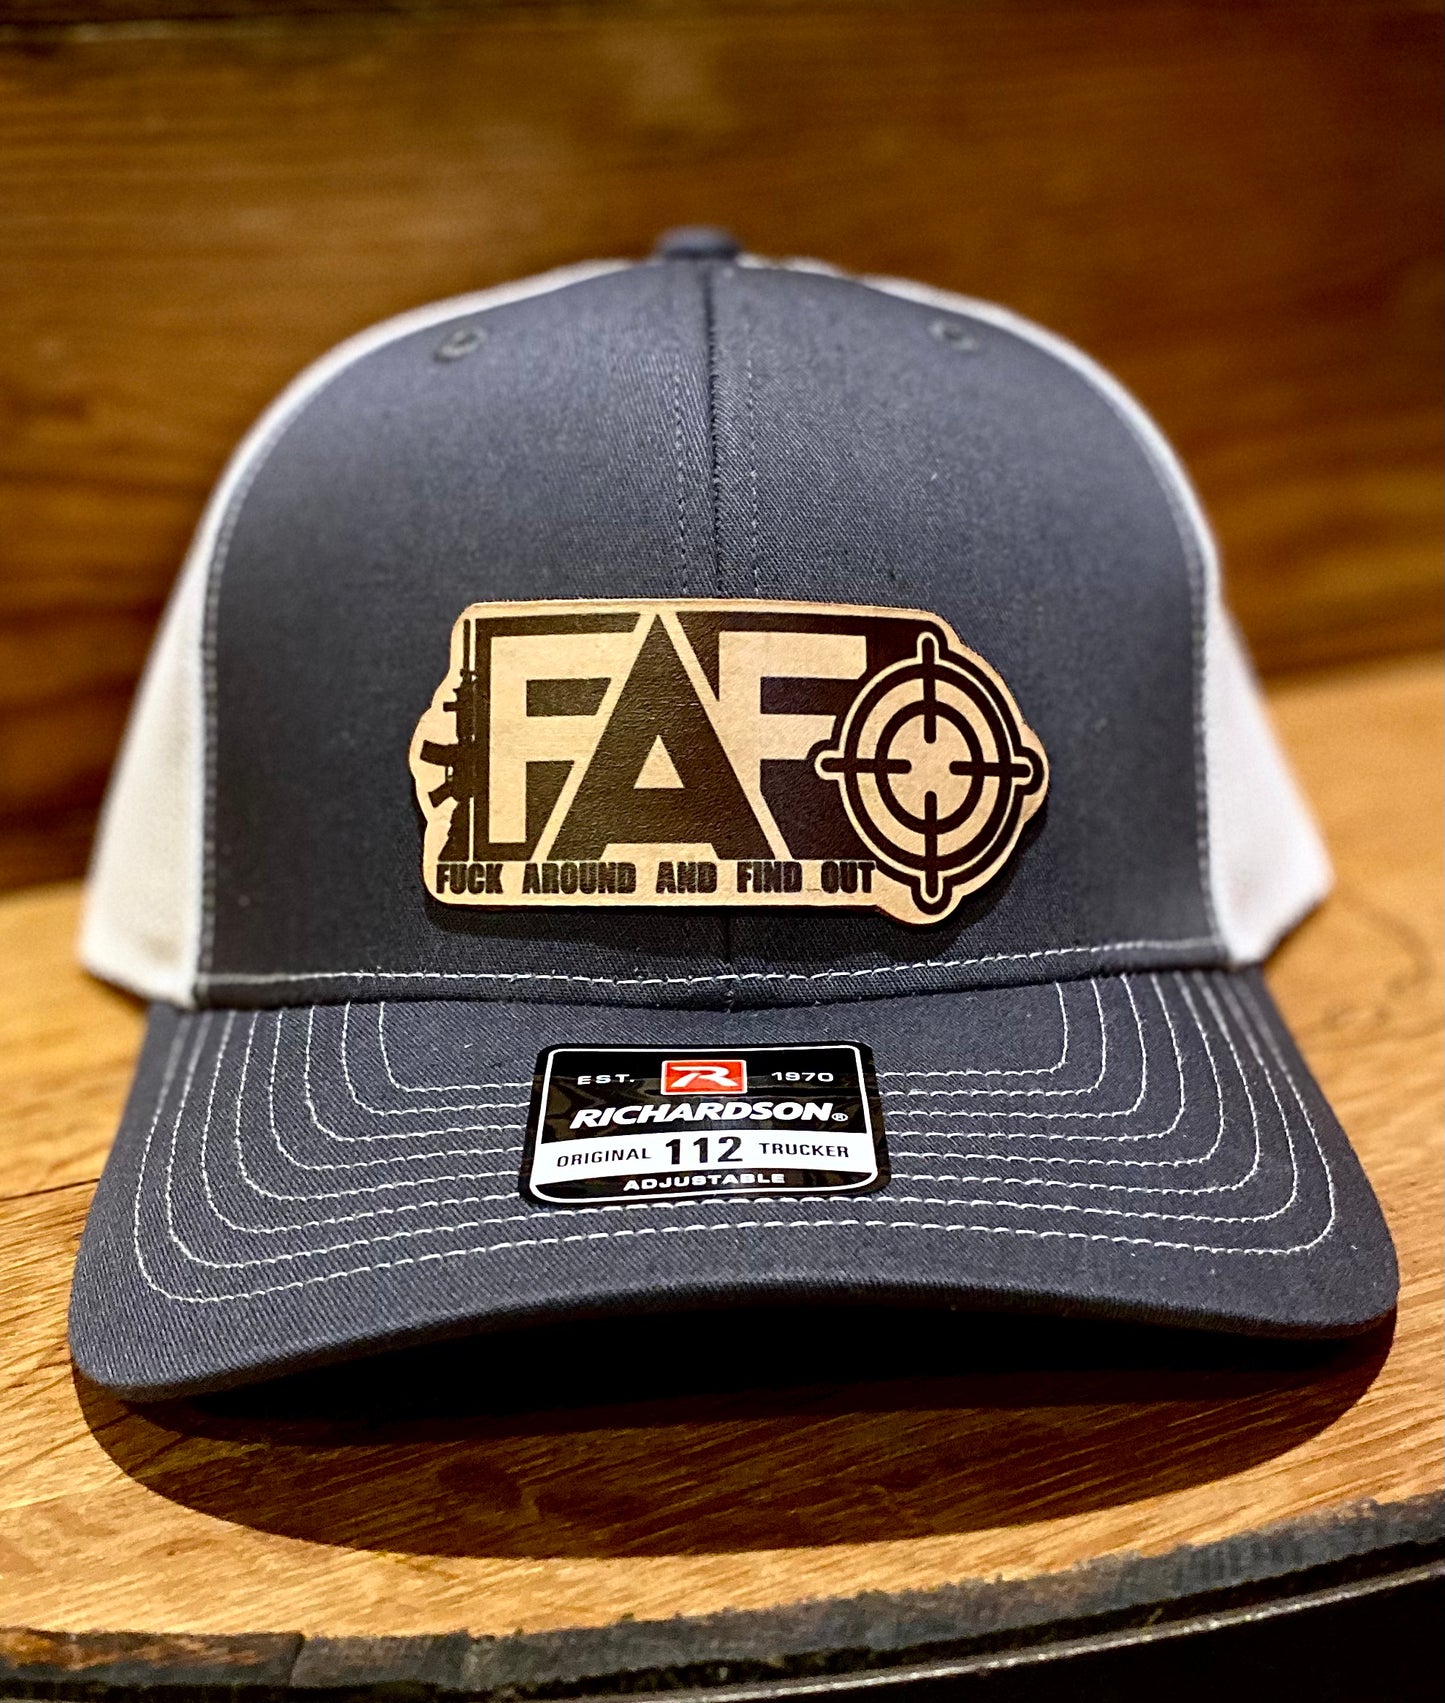 FAFO - CountryFide Custom Accessories and Outdoors